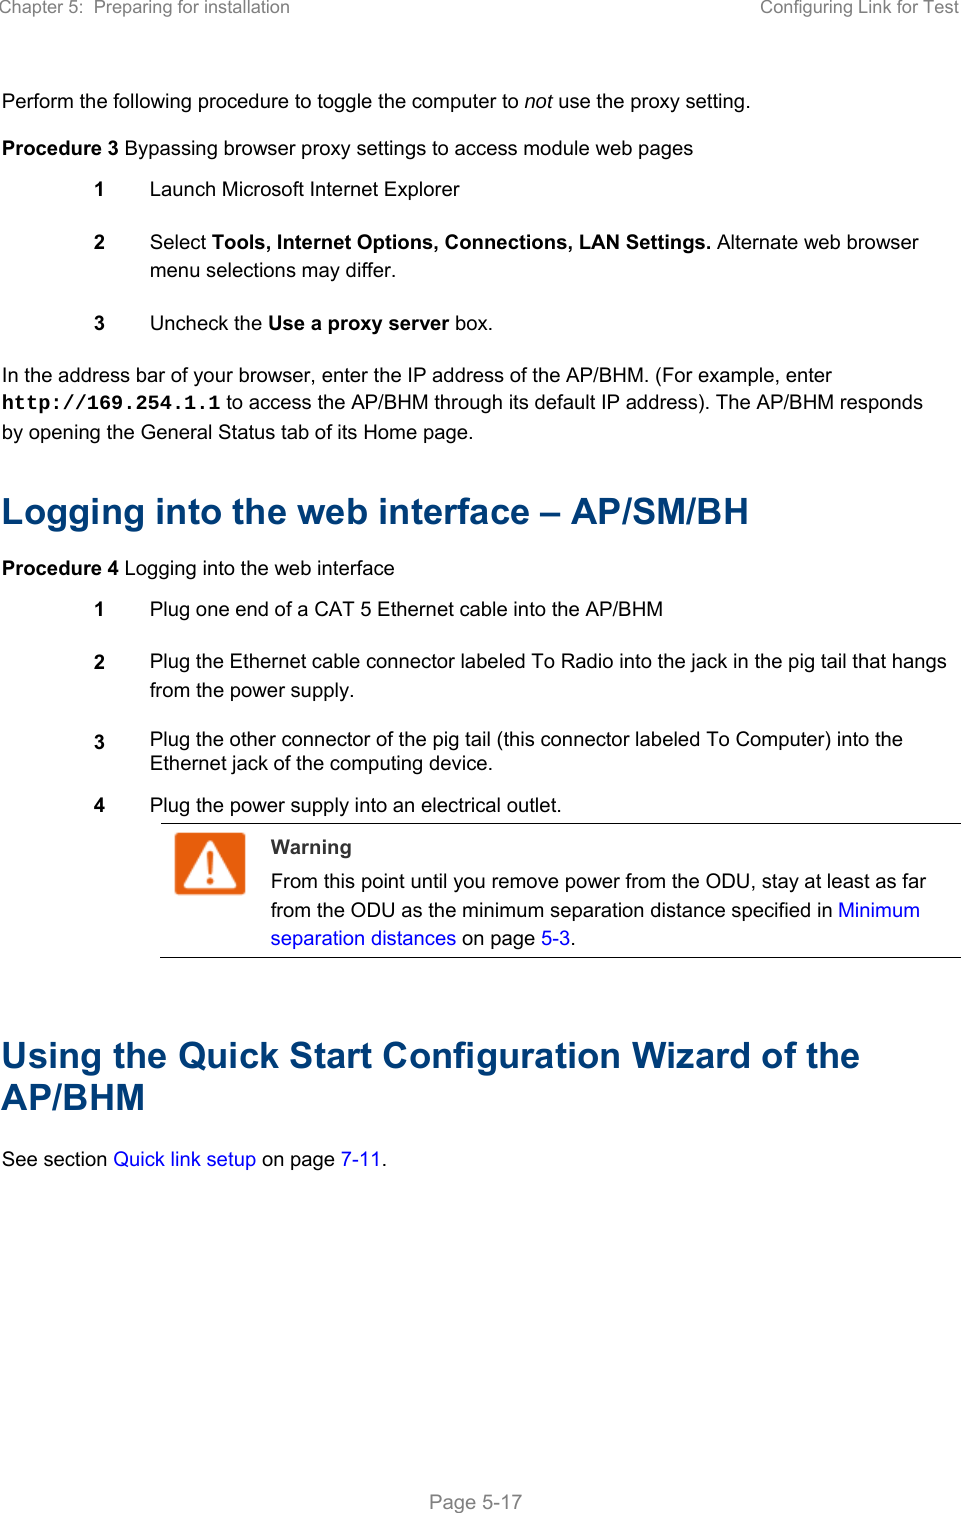 Chapter 5:  Preparing for installation  Configuring Link for Test   Page 5-17 Perform the following procedure to toggle the computer to not use the proxy setting. Procedure 3 Bypassing browser proxy settings to access module web pages 1  Launch Microsoft Internet Explorer 2  Select Tools, Internet Options, Connections, LAN Settings. Alternate web browser menu selections may differ. 3  Uncheck the Use a proxy server box. In the address bar of your browser, enter the IP address of the AP/BHM. (For example, enter http://169.254.1.1 to access the AP/BHM through its default IP address). The AP/BHM responds by opening the General Status tab of its Home page.  Logging into the web interface – AP/SM/BH Procedure 4 Logging into the web interface 1  Plug one end of a CAT 5 Ethernet cable into the AP/BHM 2  Plug the Ethernet cable connector labeled To Radio into the jack in the pig tail that hangs from the power supply. 3  Plug the other connector of the pig tail (this connector labeled To Computer) into the Ethernet jack of the computing device. 4  Plug the power supply into an electrical outlet.  Warning From this point until you remove power from the ODU, stay at least as far from the ODU as the minimum separation distance specified in Minimum separation distances on page 5-3.   Using the Quick Start Configuration Wizard of the AP/BHM See section Quick link setup on page 7-11.       